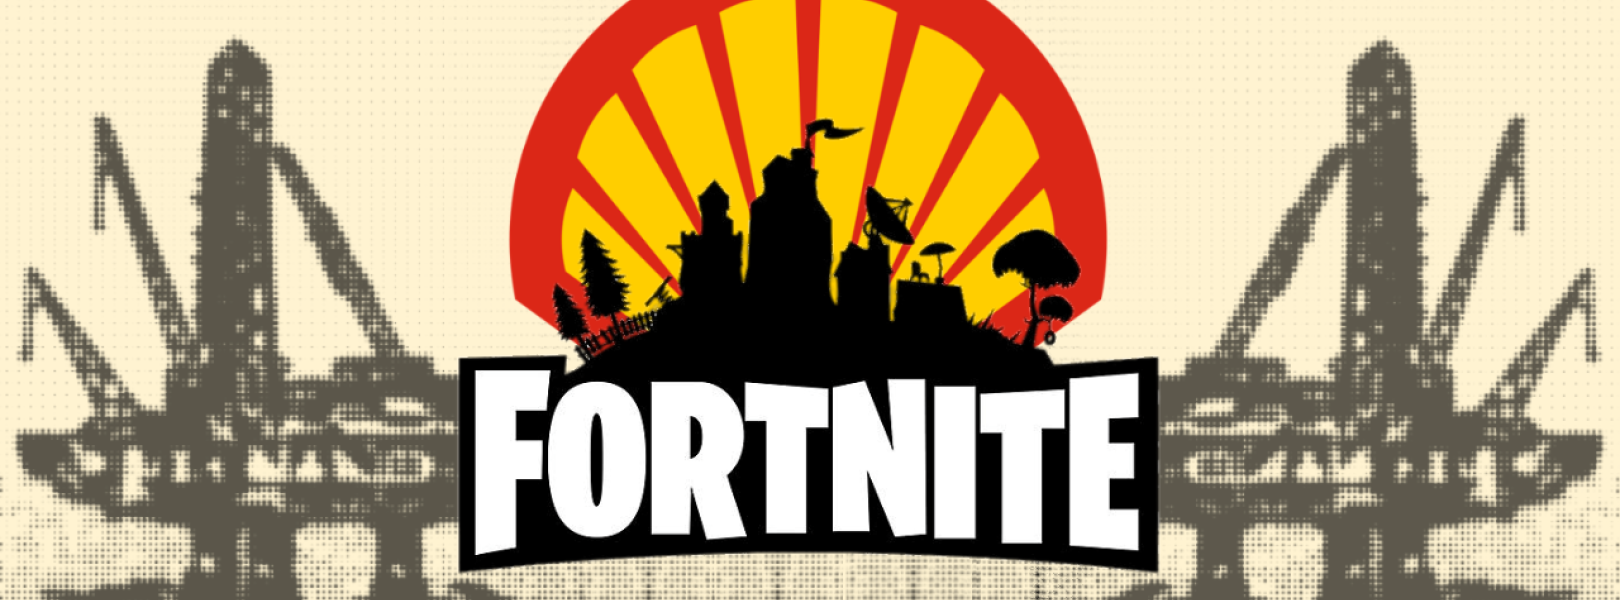 Shell and Fortnite logos combined 